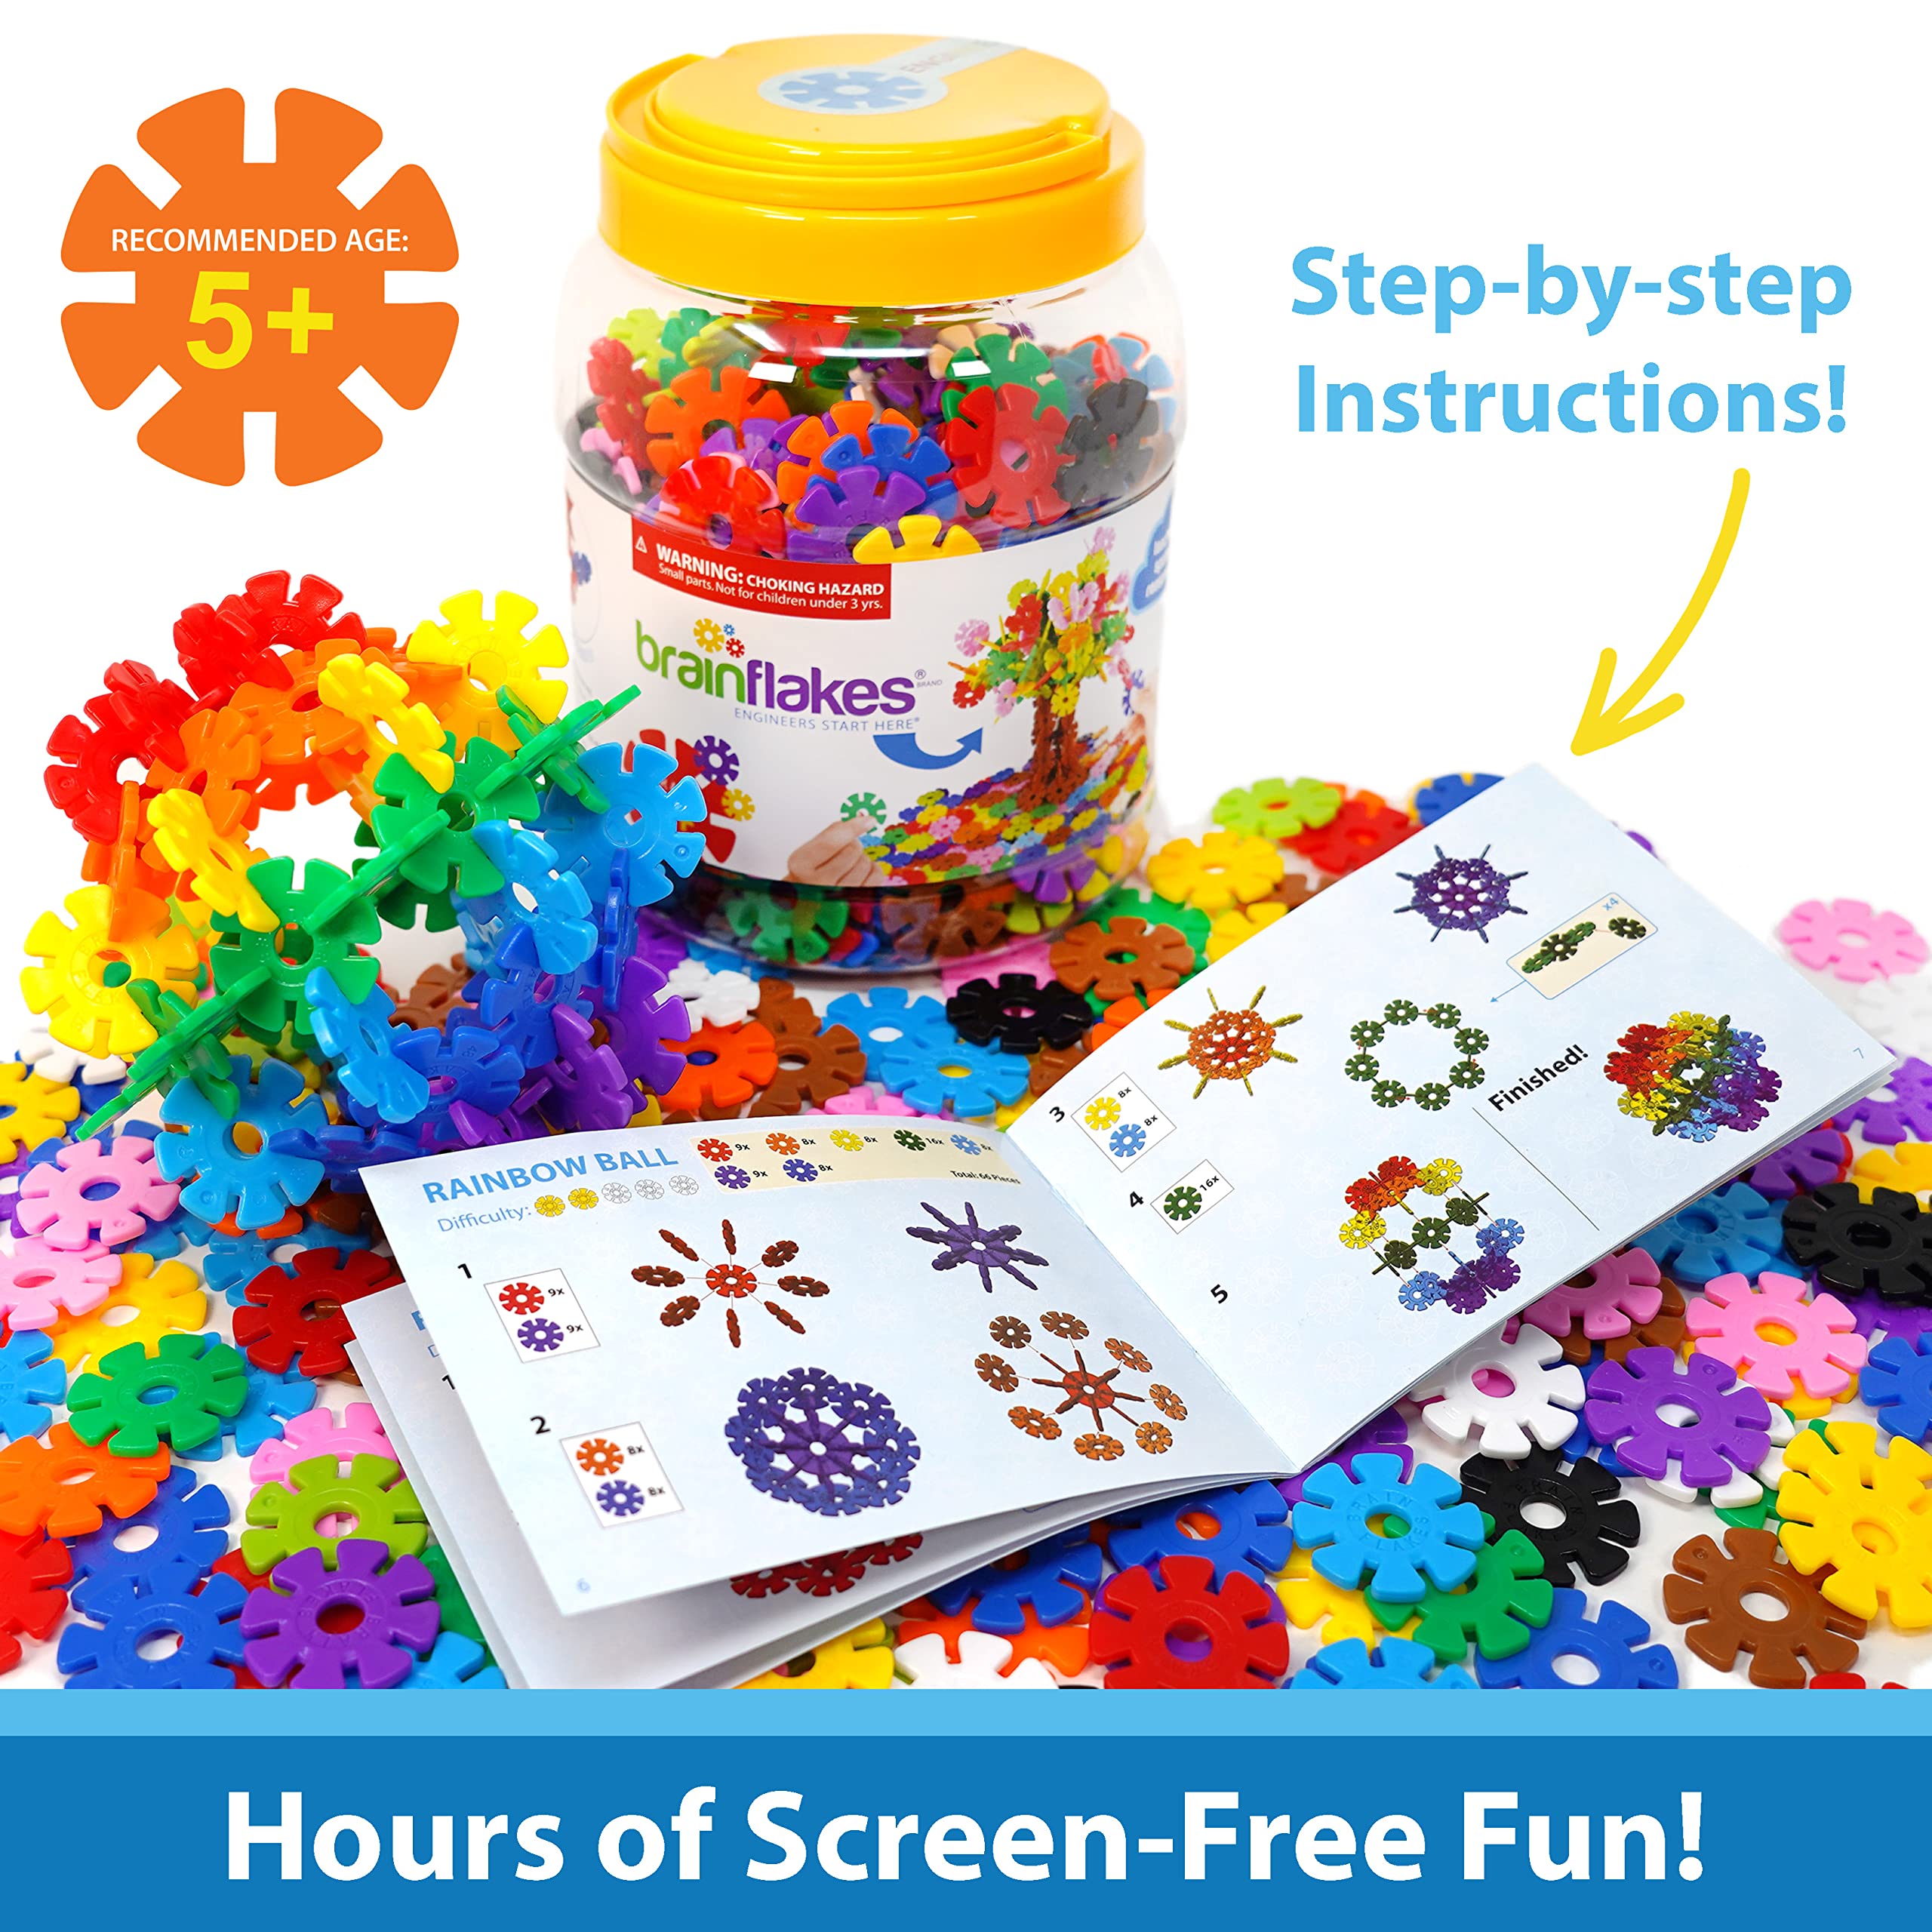 VIAHART Brain Flakes 500 Piece Interlocking Plastic Disc Set - A Creative and Educational Alternative to Building Blocks - Tested for Children's Safety - A Great Stem Toy for Both Boys and Girls